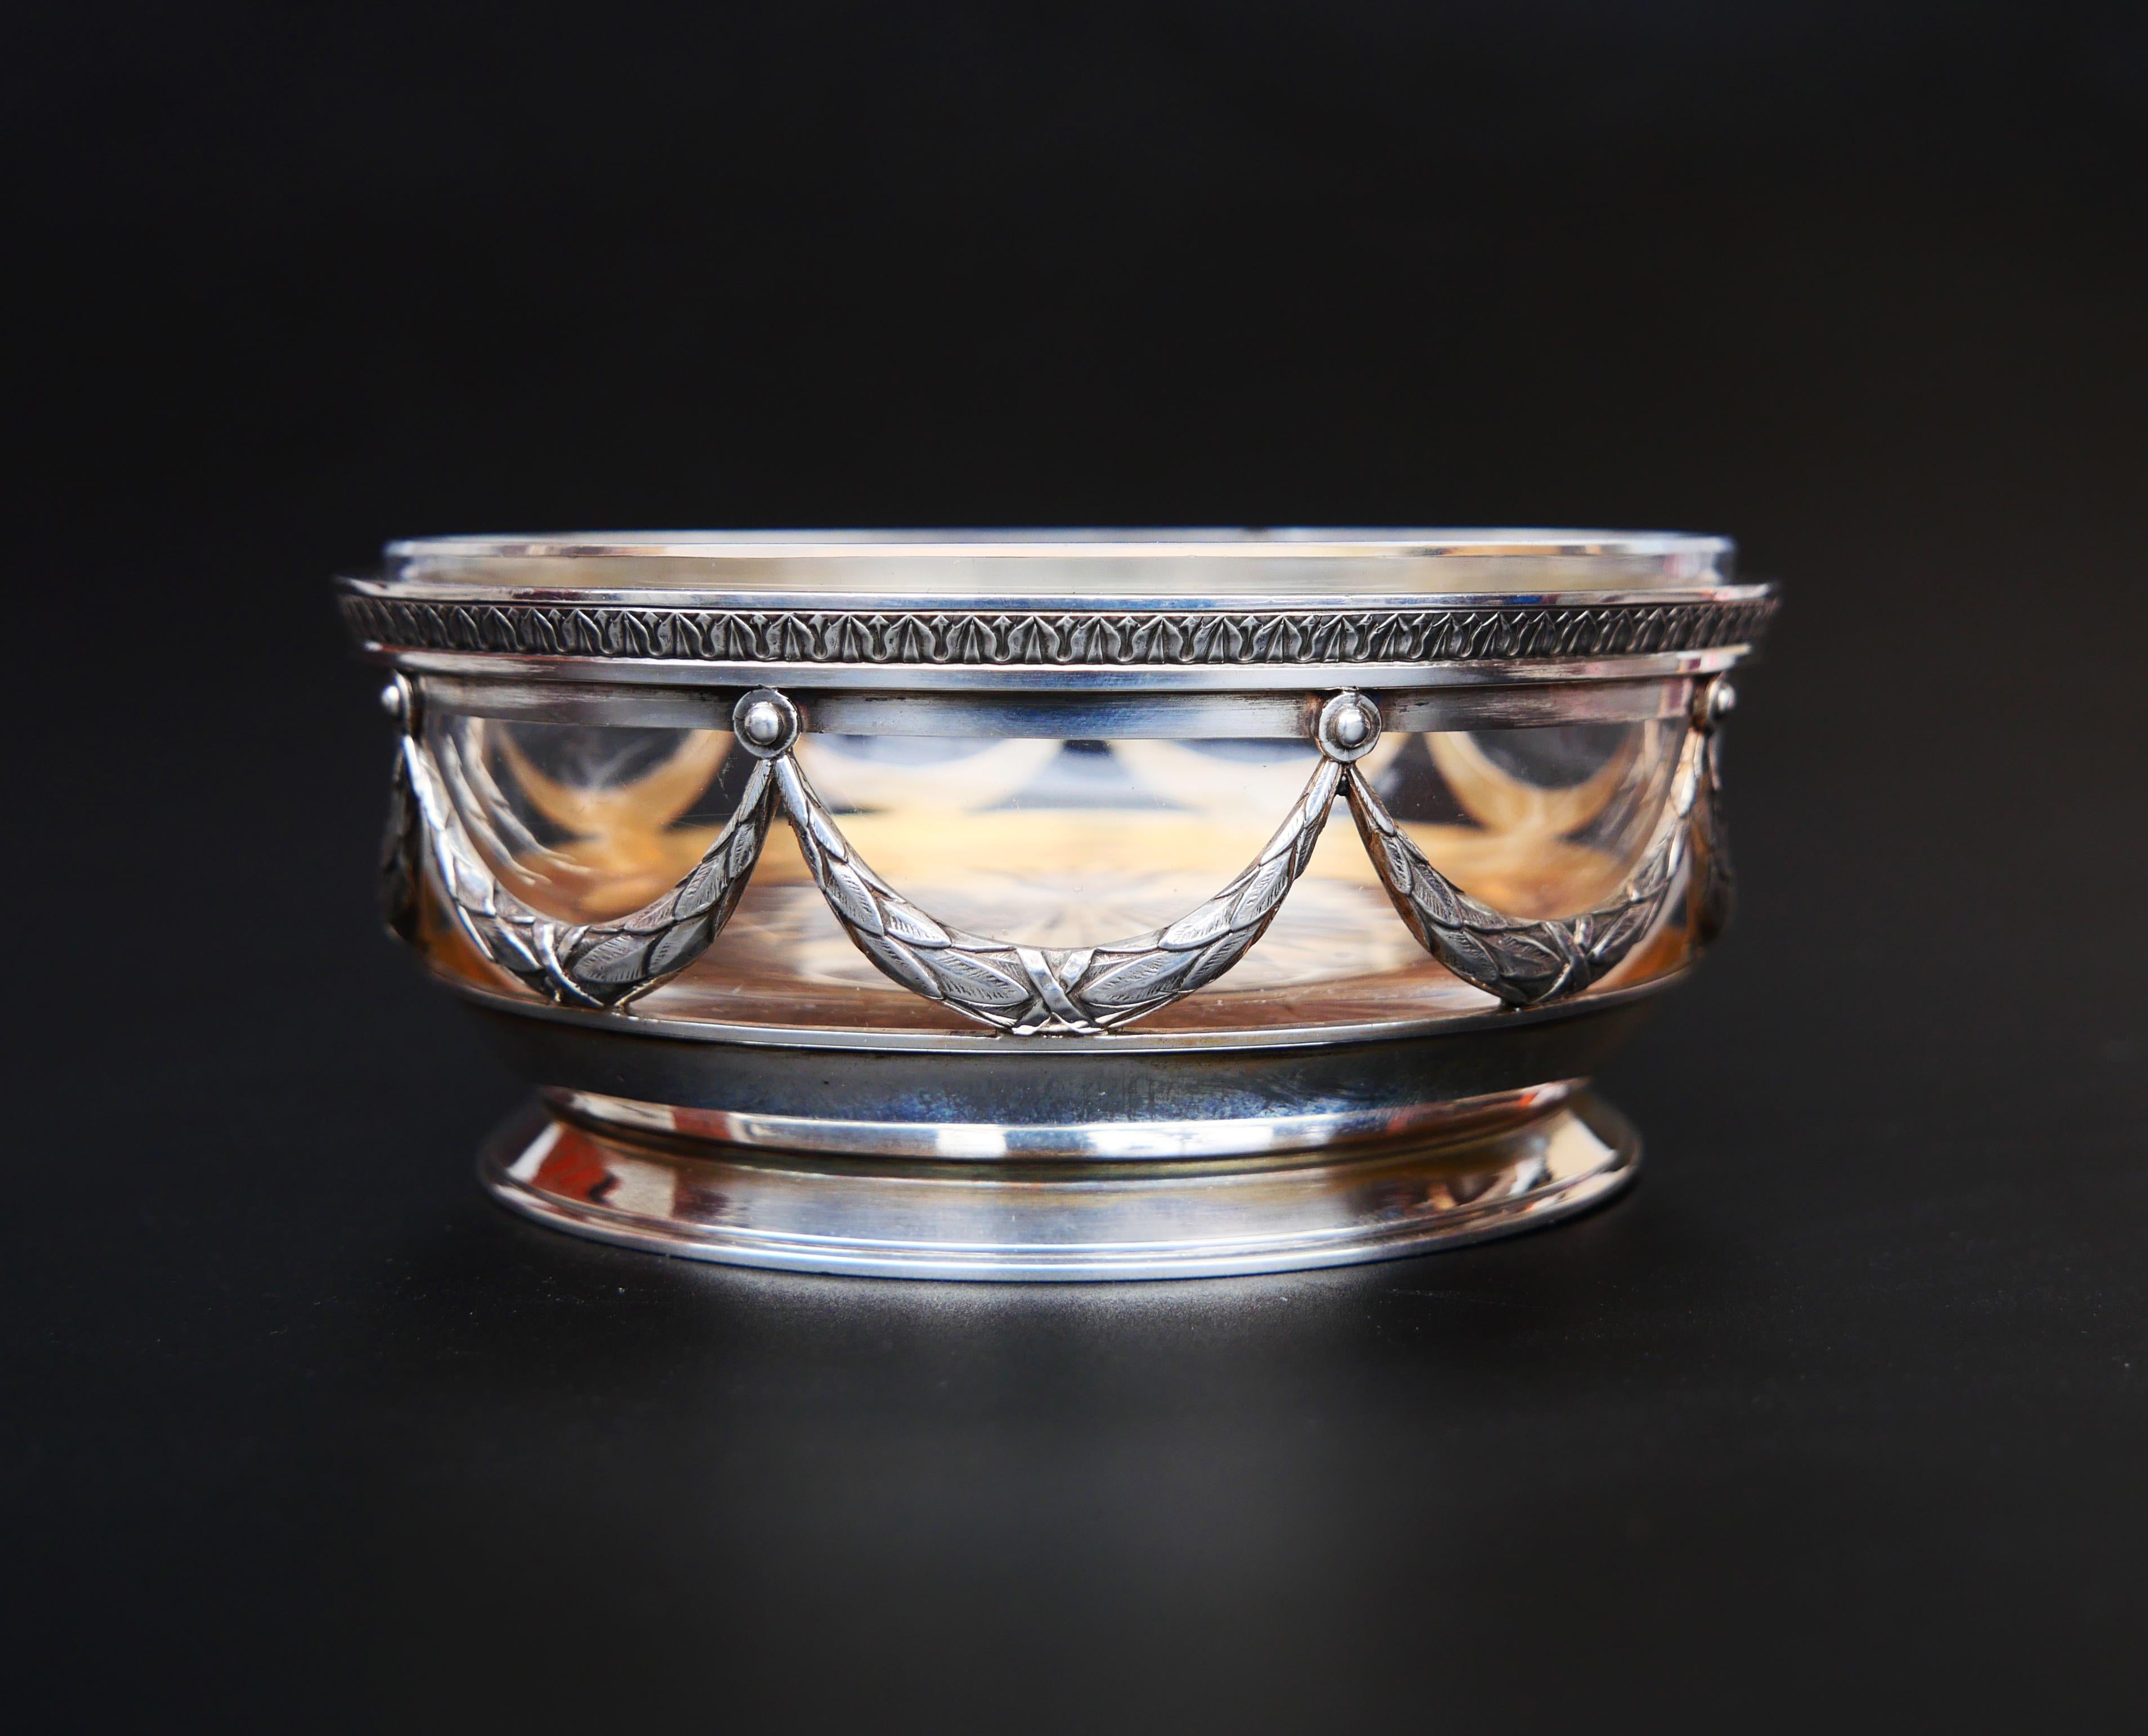 Taille rose 1908 -1916 Antique Faberge Russian Empire solid 84 Silver Cut Crystal Glass Bowl (bol en cristal taillé)